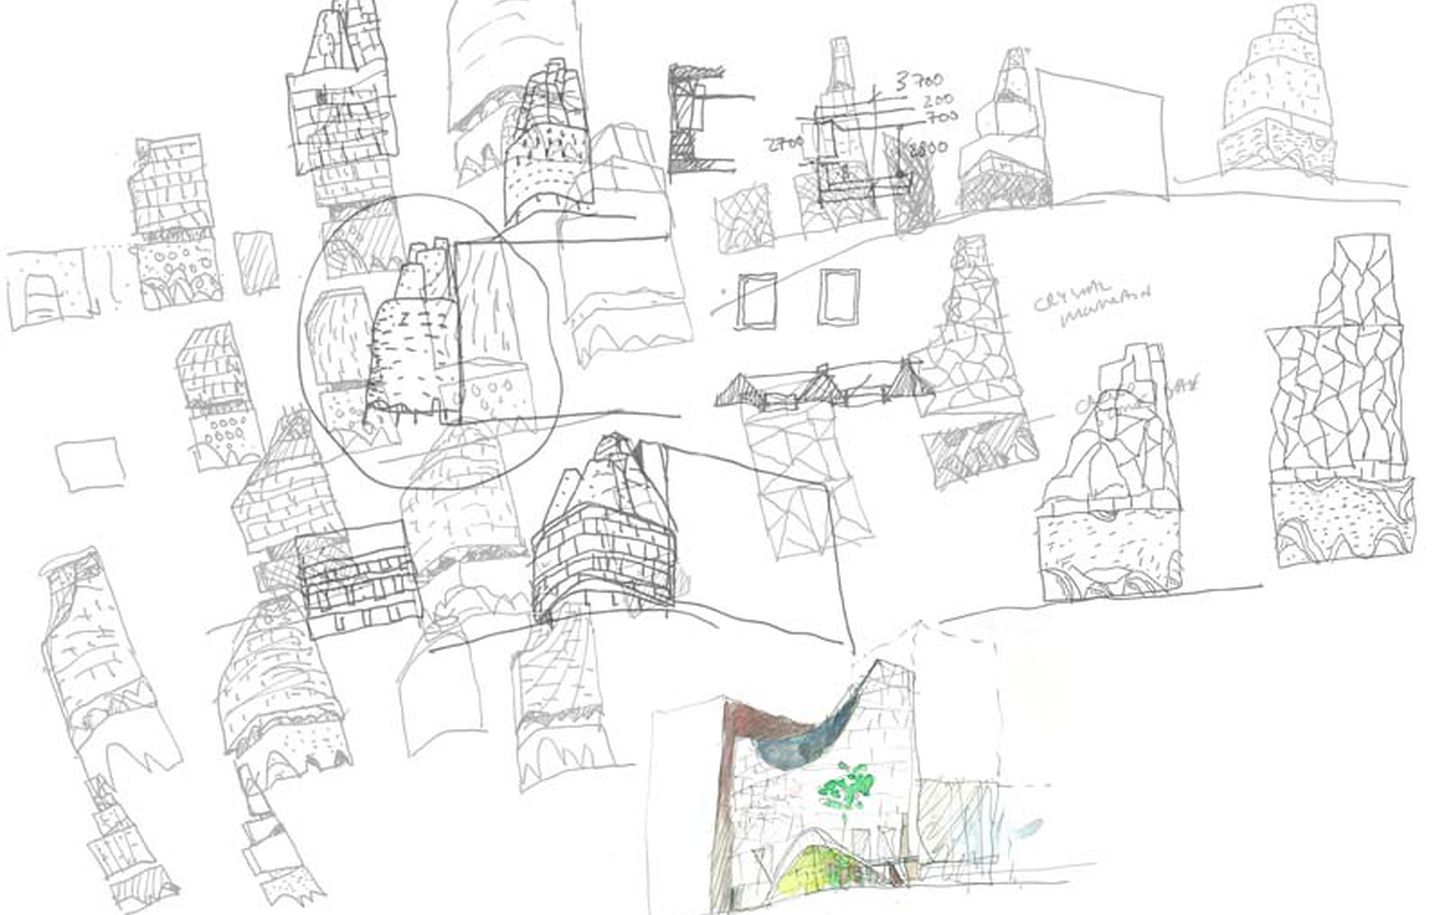 hand drawn concept sketches of commercial tower in Sydney Australia designed by Durbach Block Jaggers Architects